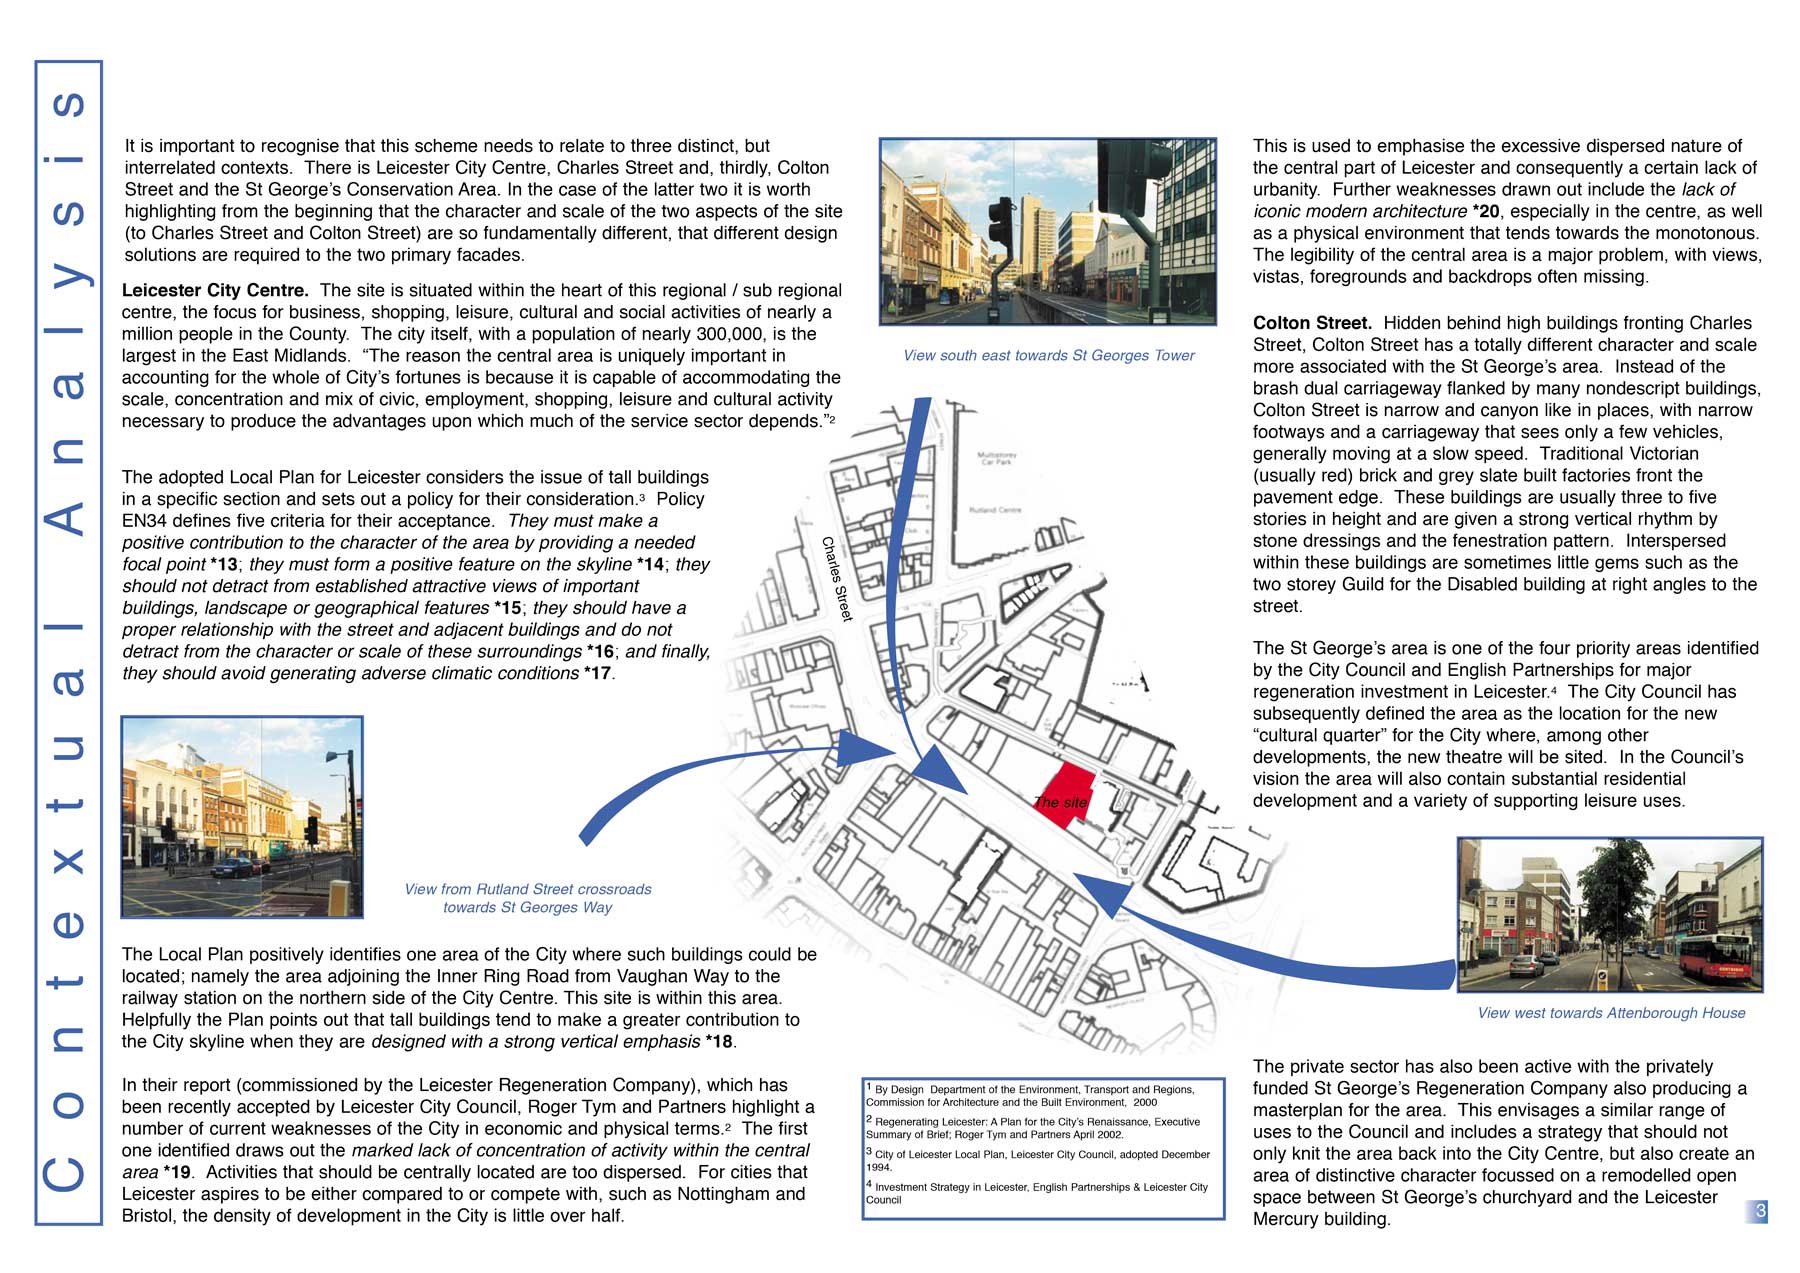 Image of page 3 of the statement with paragraphs and a technical drawing in the middle showing various details of the street and buildings